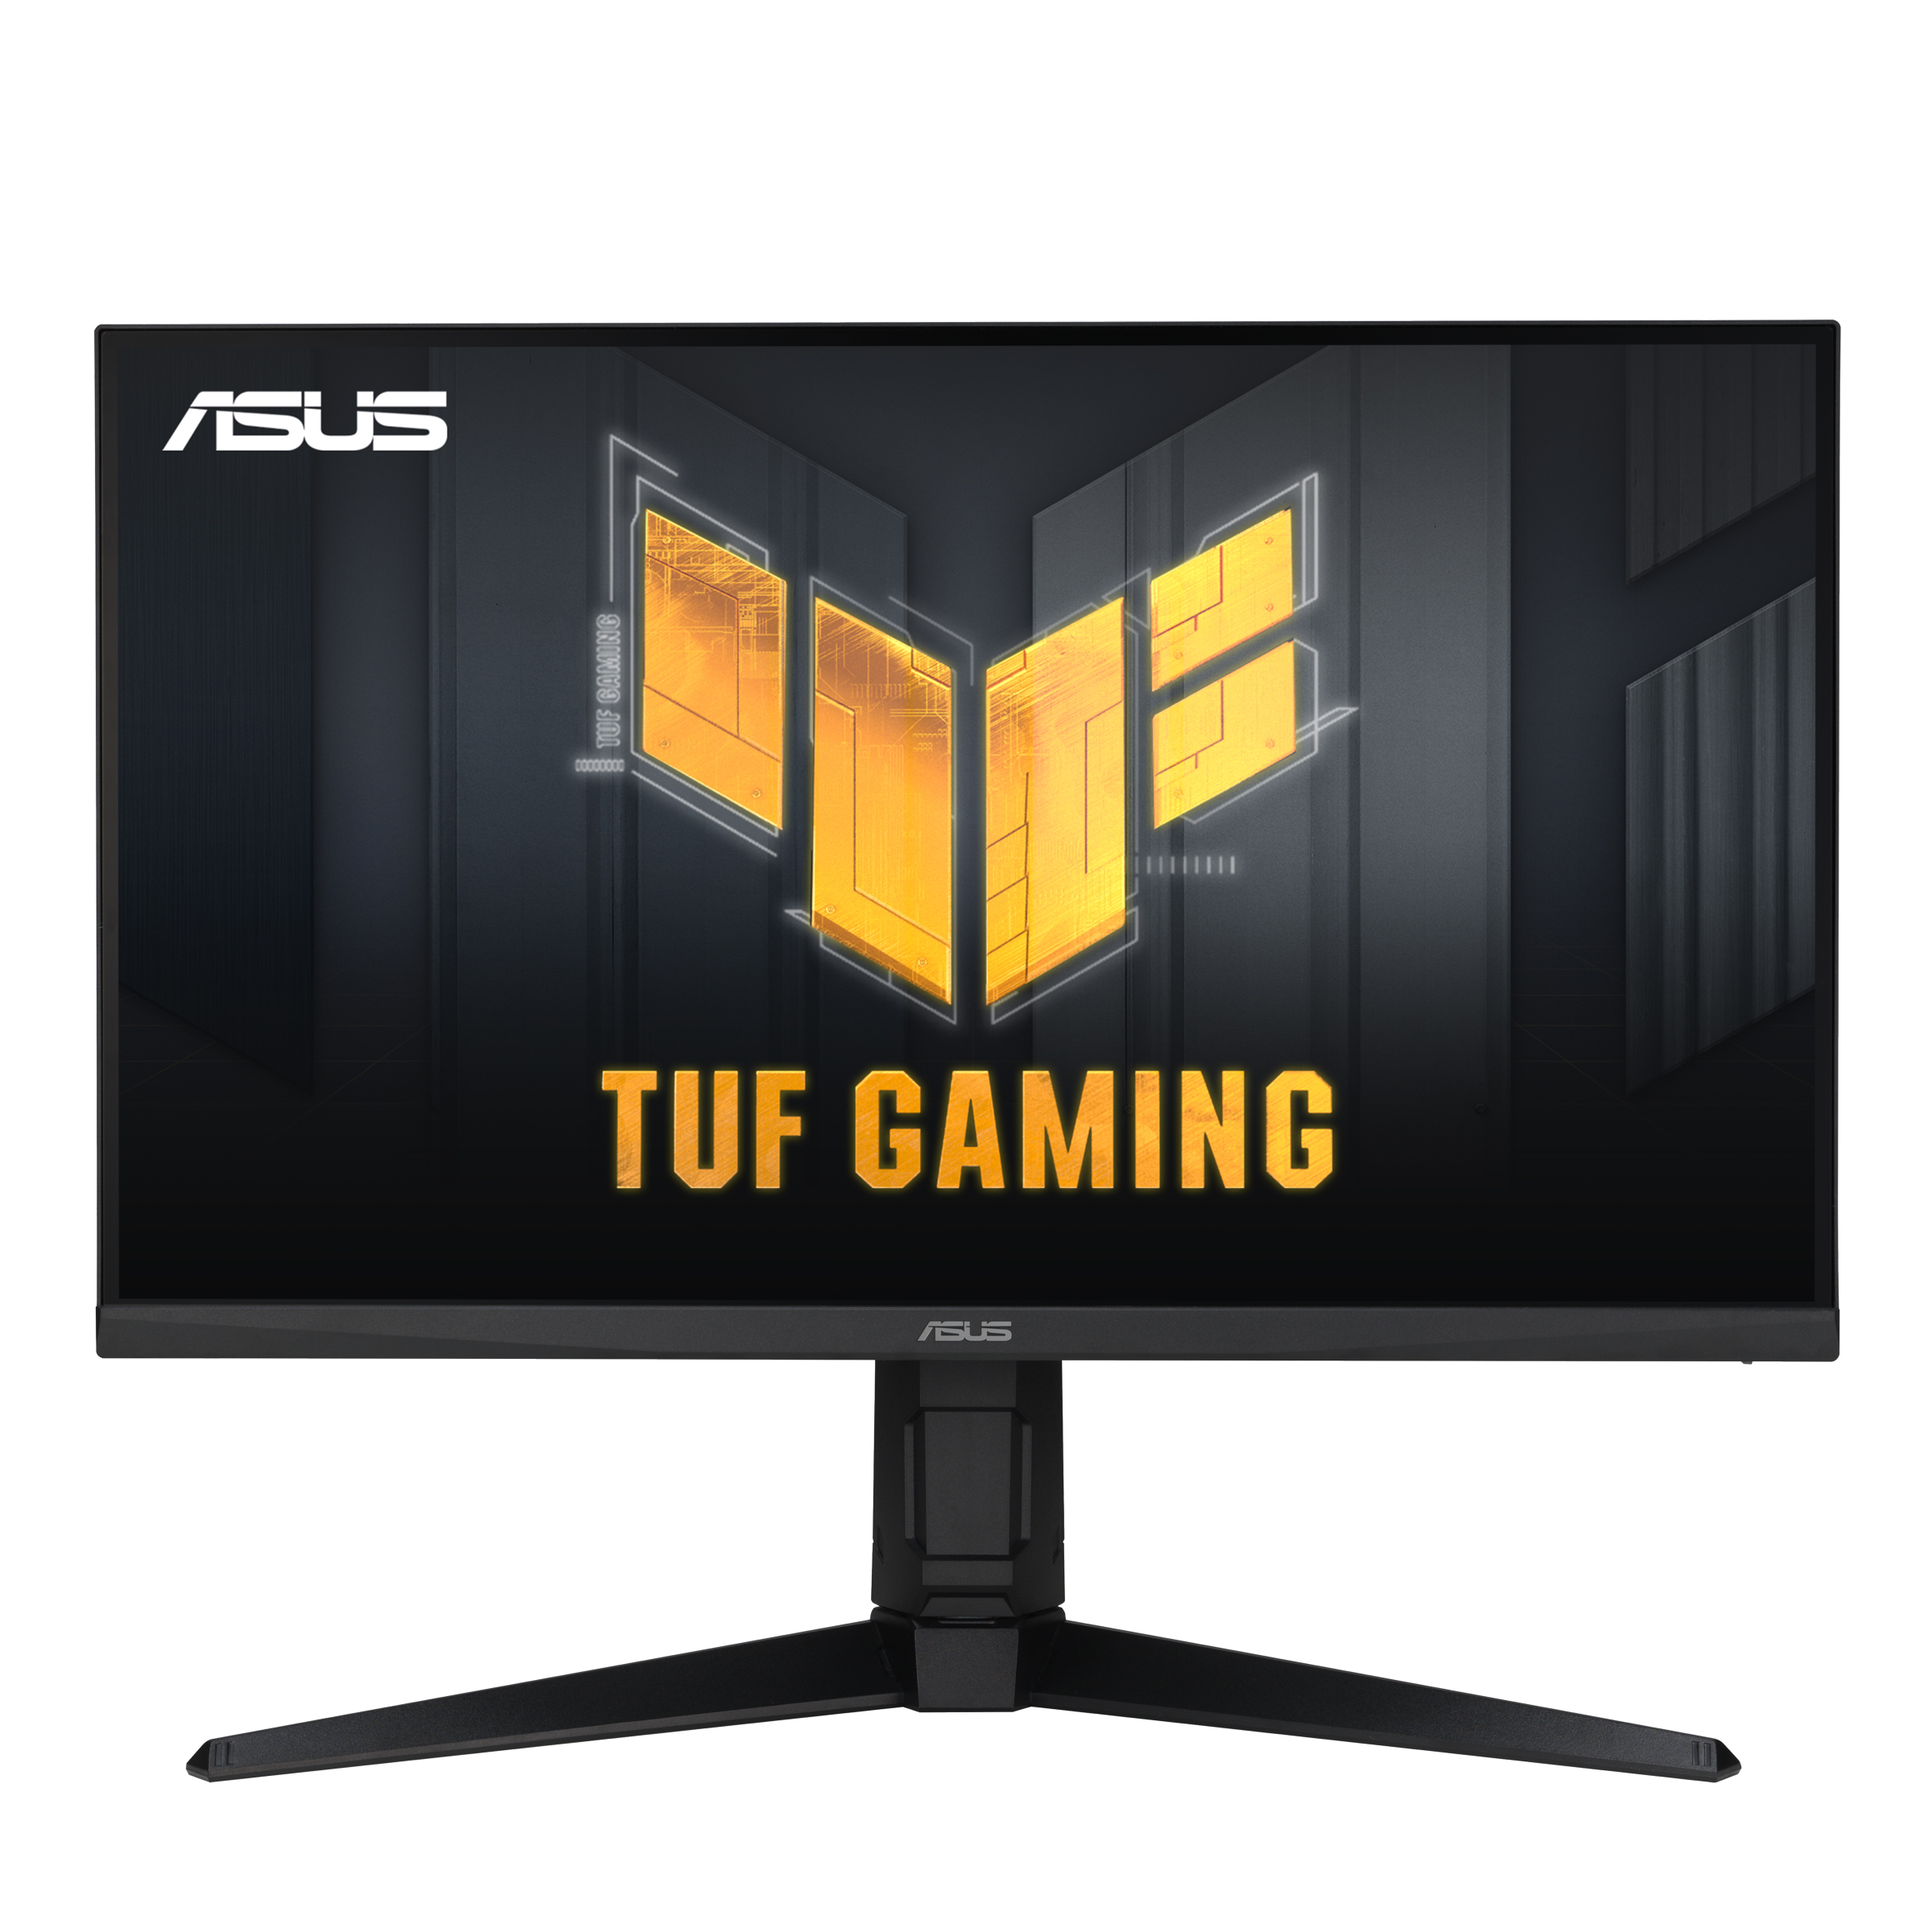 ASUS - Monitor gaming VG27AQL1A TUF Gaming 27 pulgadas, 2K, QHD (2560 x  1440), IPS, 170 Hz (compatible con 144 Hz), 1 ms, Extreme Low Motion Blur